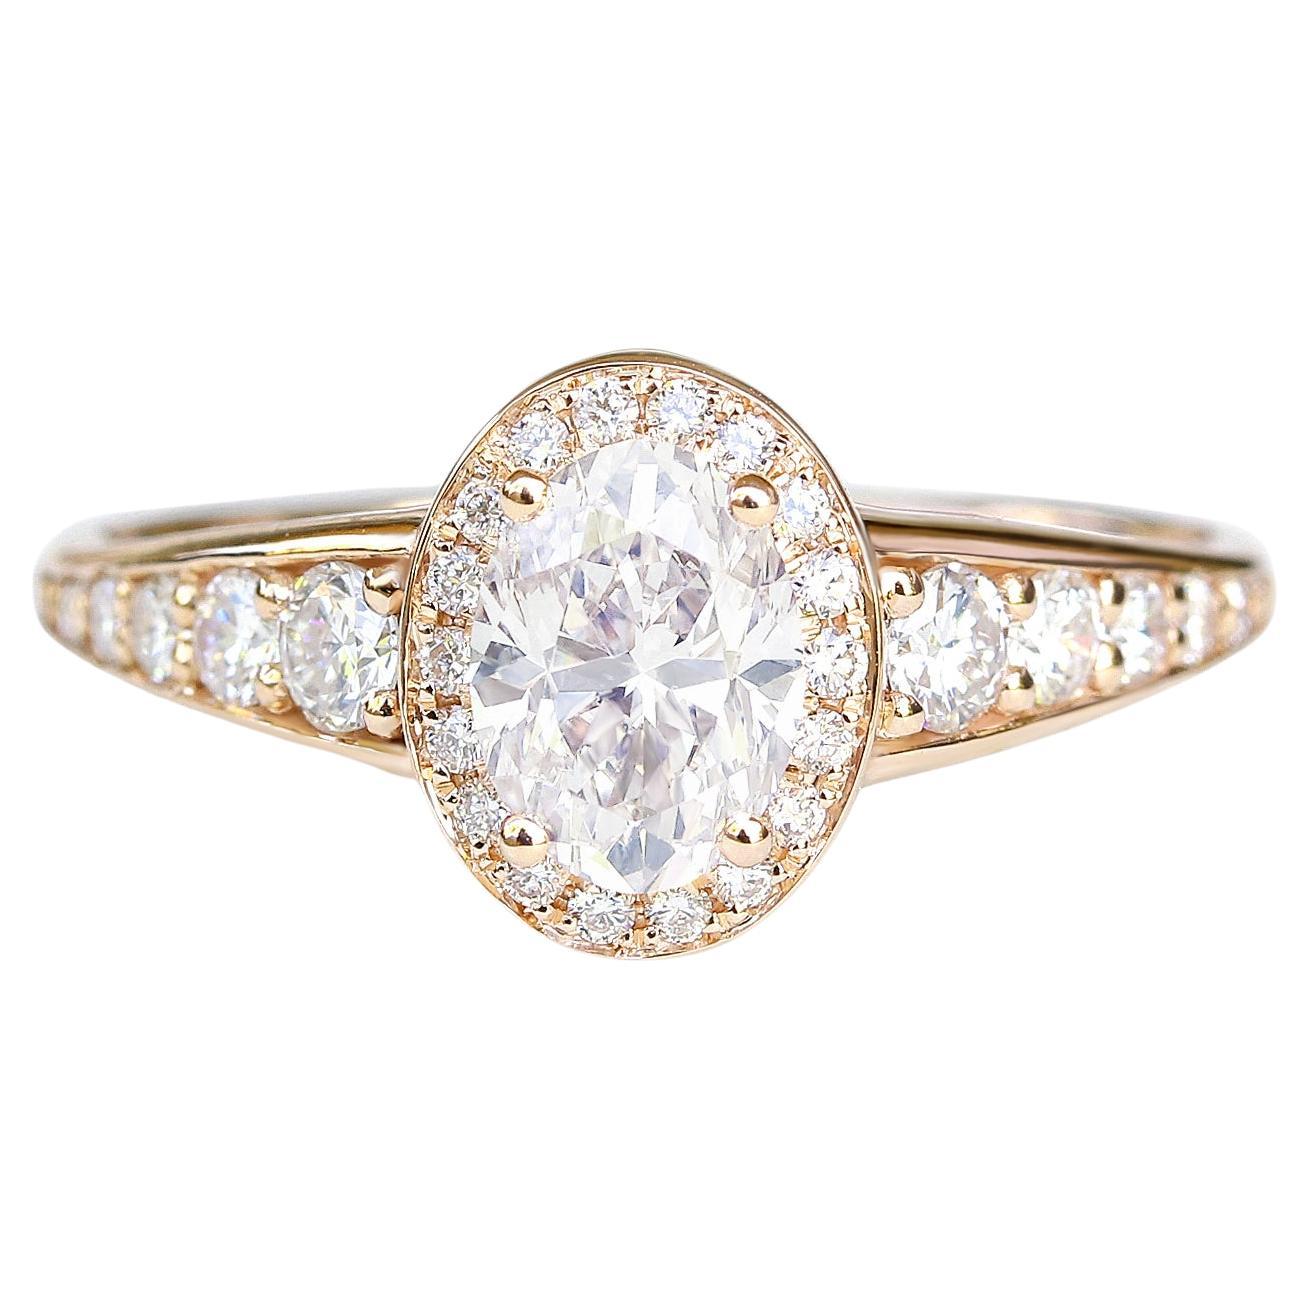 Oval Diamond 0.98ct Vintage Diamond Band Delicate Engagement Ring, "Donna"